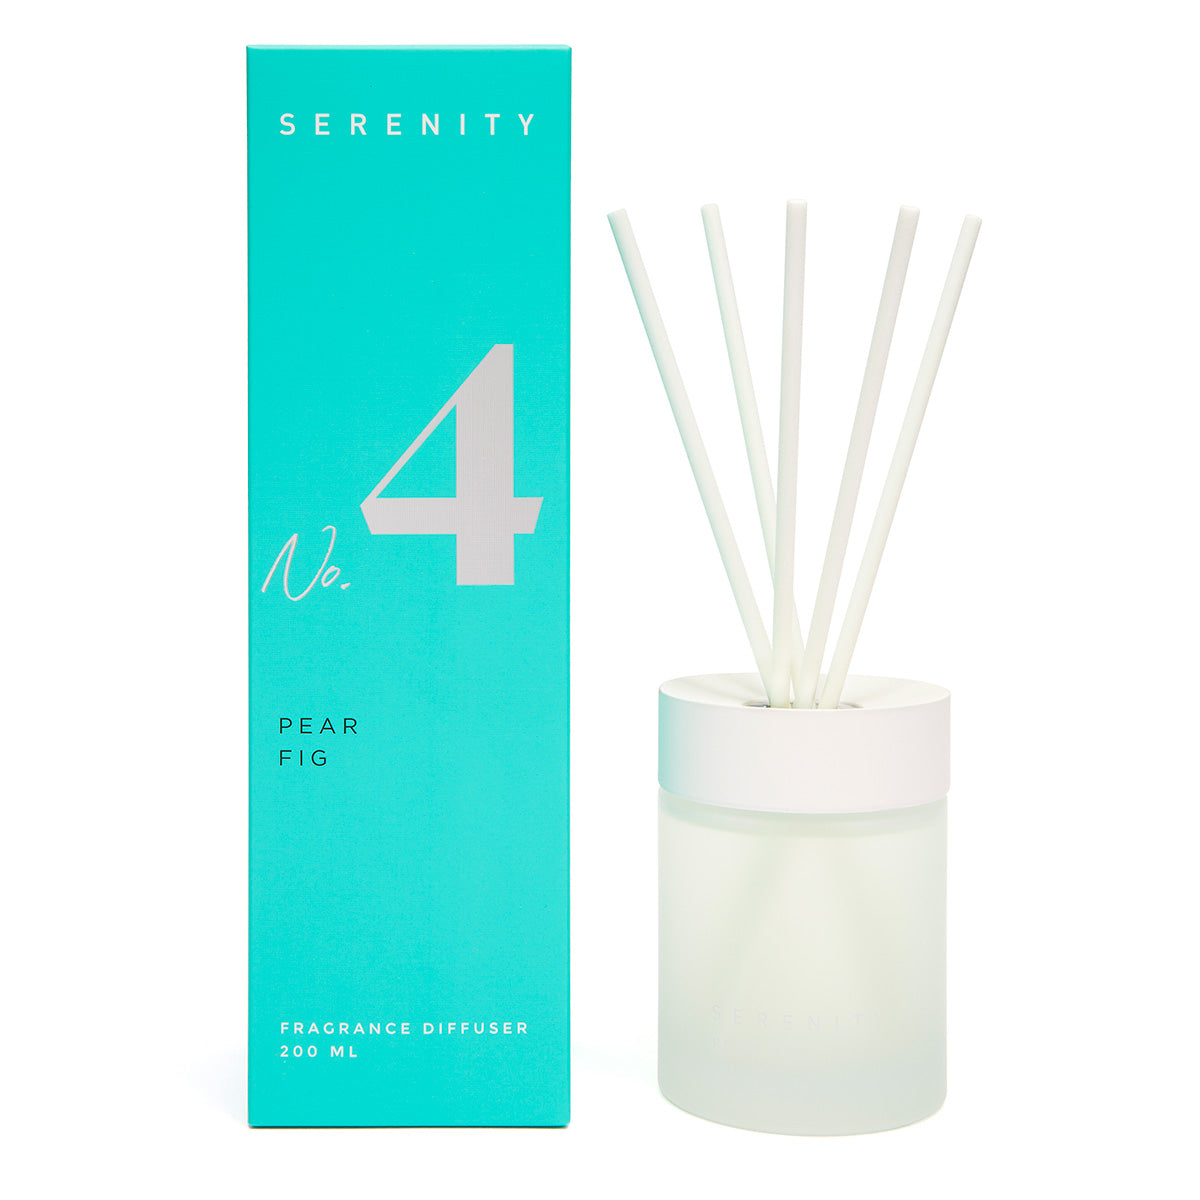 Pear Fig Serenity Reed Diffuser